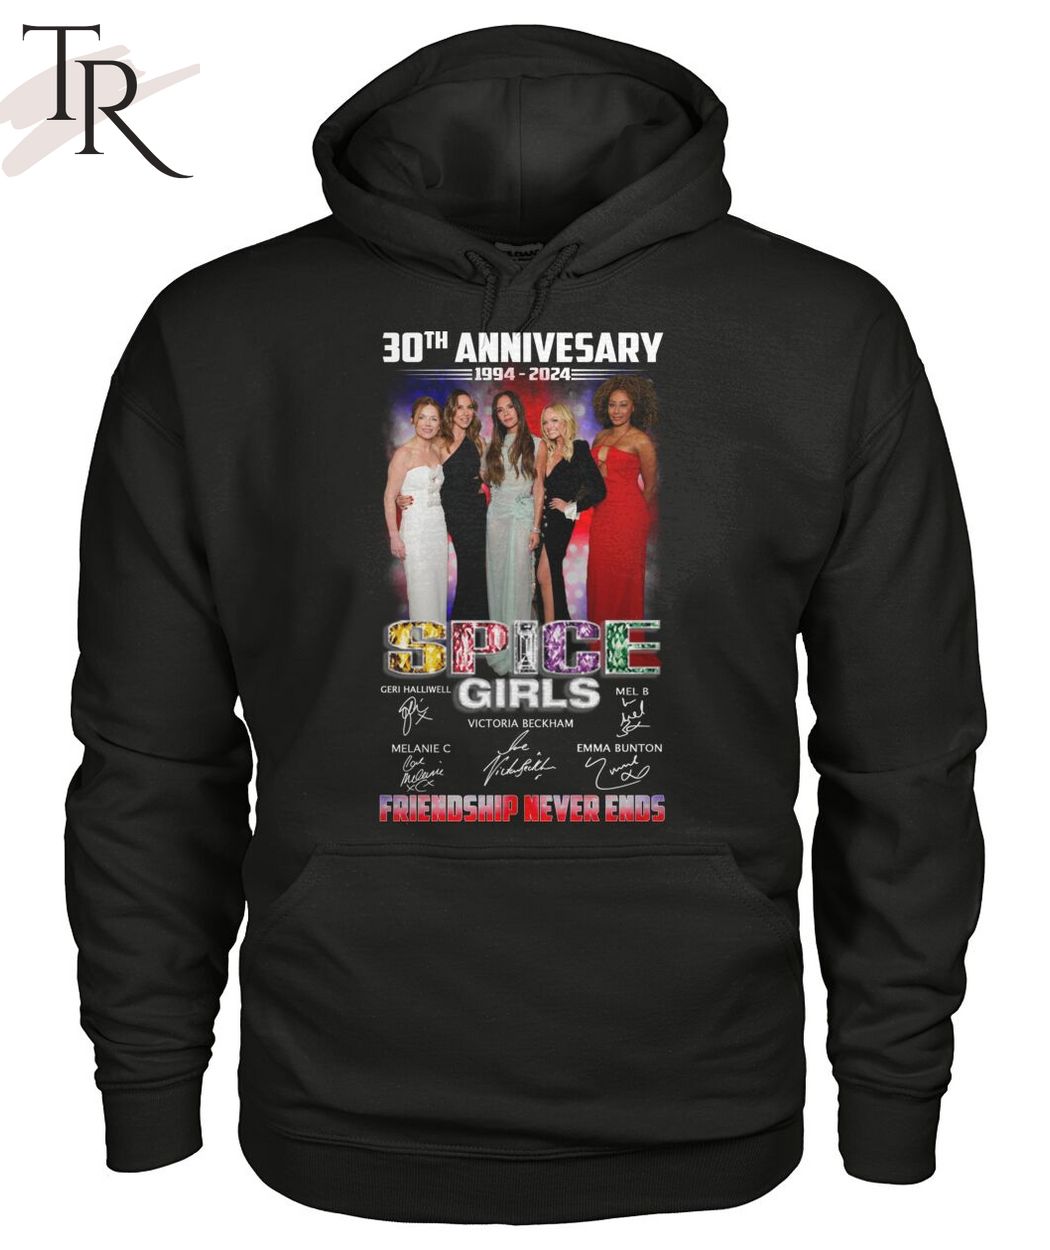 30th Anniversary 1994-2024 Spice Girl Friendship Never Ends T-Shirt